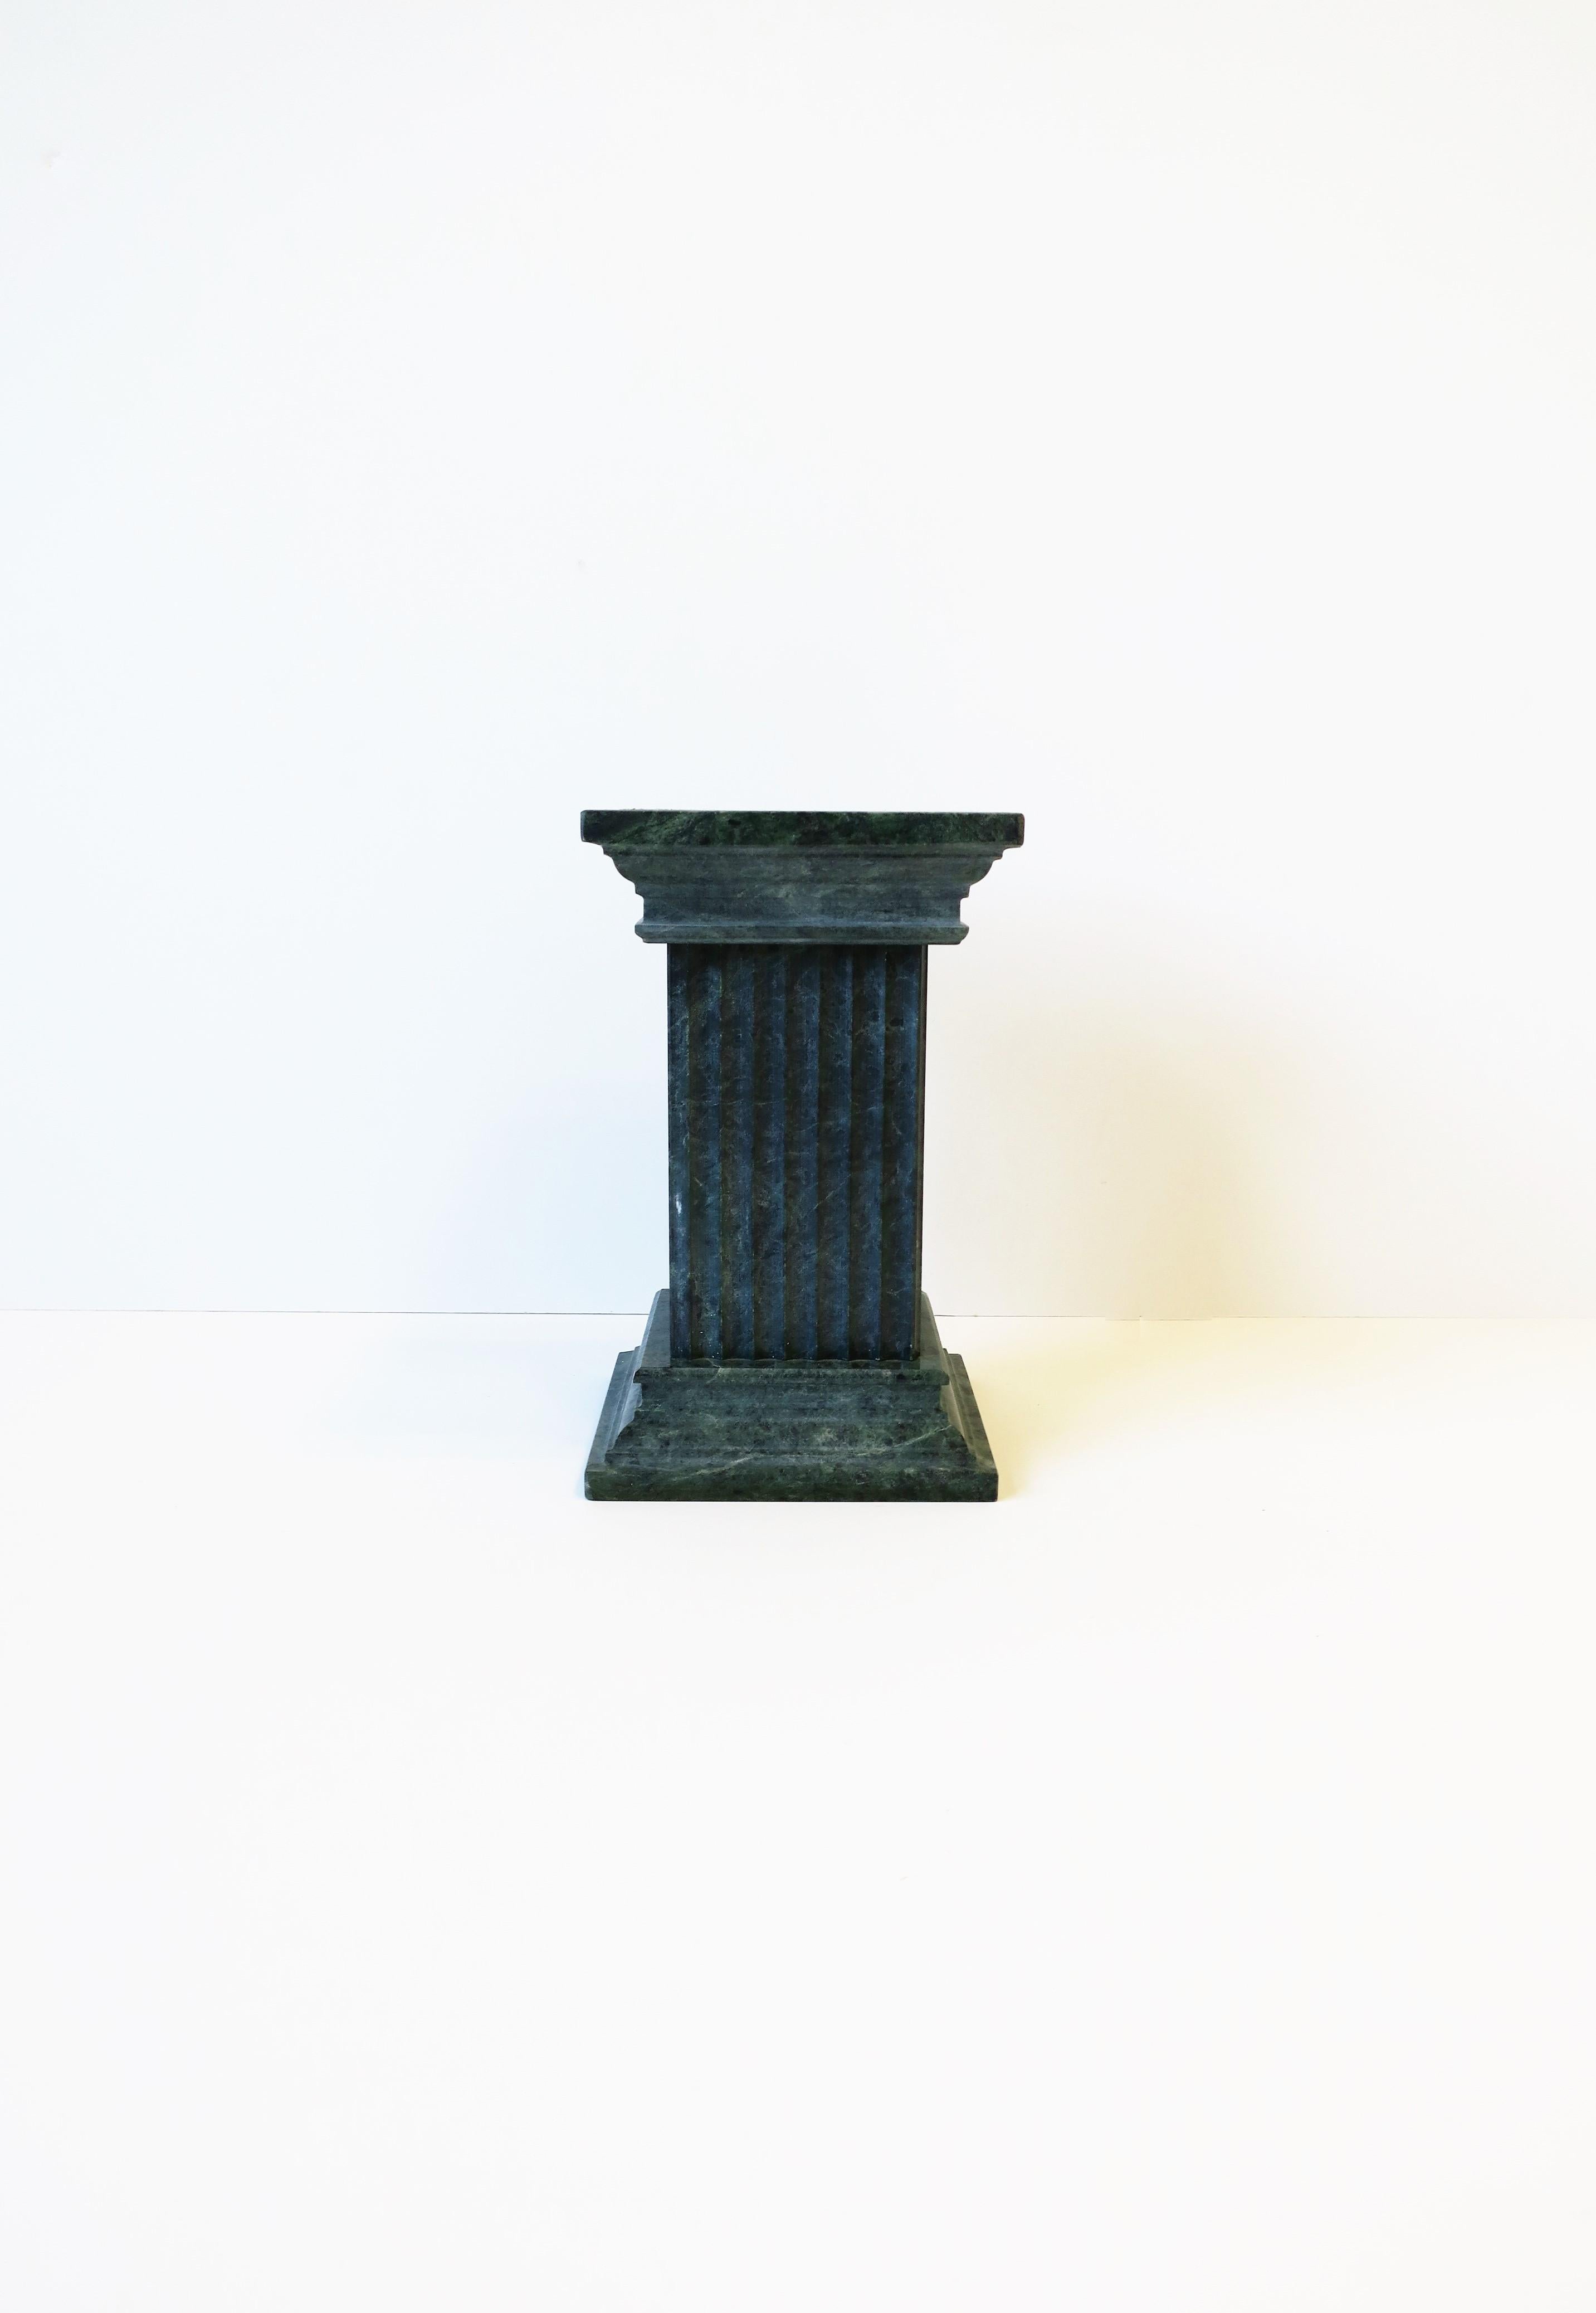 A substantial green and white marble column pillar bookend or decorative object, circa late 20th century. A small pillar column pedestal stand or bookend is in excellent condition. Column architecture is in the style of the 'fluted non-tapered